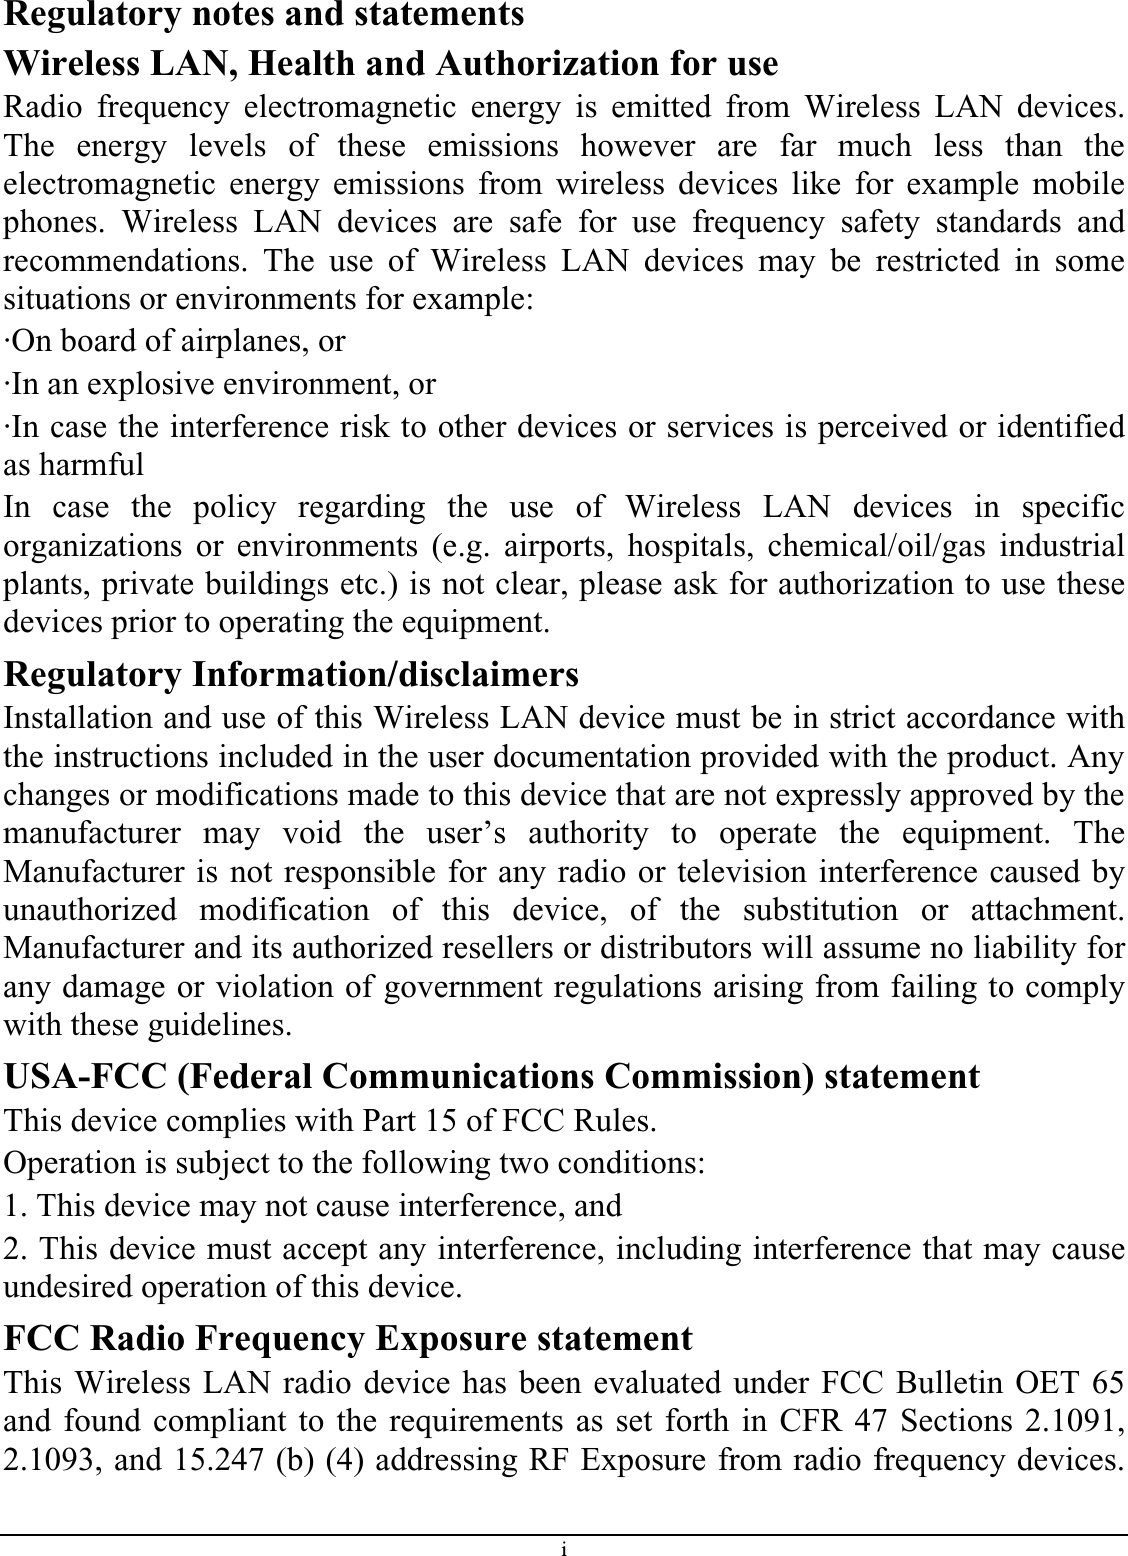 iRegulatory notes and statementsWireless LAN, Health and Authorization for useRadio frequency electromagnetic energy is emitted from Wireless LAN devices.The energy levels of these emissions however are far much less than theelectromagnetic energy emissions from wireless devices like for example mobilephones. Wireless LAN devices are safe for use frequency safety standards andrecommendations. The use of Wireless LAN devices may be restricted in somesituations or environments for example:·On board of airplanes, or·In an explosive environment, or·In case the interference risk to other devices or services is perceived or identifiedas harmfulIn case the policy regarding the use of Wireless LAN devices in specificorganizations or environments (e.g. airports, hospitals, chemical/oil/gas industrialplants, private buildings etc.) is not clear, please ask for authorization to use thesedevices prior to operating the equipment.Regulatory Information/disclaimersInstallation and use of this Wireless LAN device must be in strict accordance withthe instructions included in the user documentation provided with the product. Any changes or modifications made to this device that are not expressly approved by the manufacturer may void the user’s authority to operate the equipment. TheManufacturer is not responsible for any radio or television interference caused byunauthorized modification of this device, of the substitution or attachment.Manufacturer and its authorized resellers or distributors will assume no liability forany damage or violation of government regulations arising from failing to complywith these guidelines.USA-FCC (Federal Communications Commission) statementThis device complies with Part 15 of FCC Rules.Operation is subject to the following two conditions:1. This device may not cause interference, and2. This device must accept any interference, including interference that may causeundesired operation of this device.FCC Radio Frequency Exposure statementThis Wireless LAN radio device has been evaluated under FCC Bulletin OET 65and found compliant to the requirements as set forth in CFR 47 Sections 2.1091,2.1093, and 15.247 (b) (4) addressing RF Exposure from radio frequency devices.